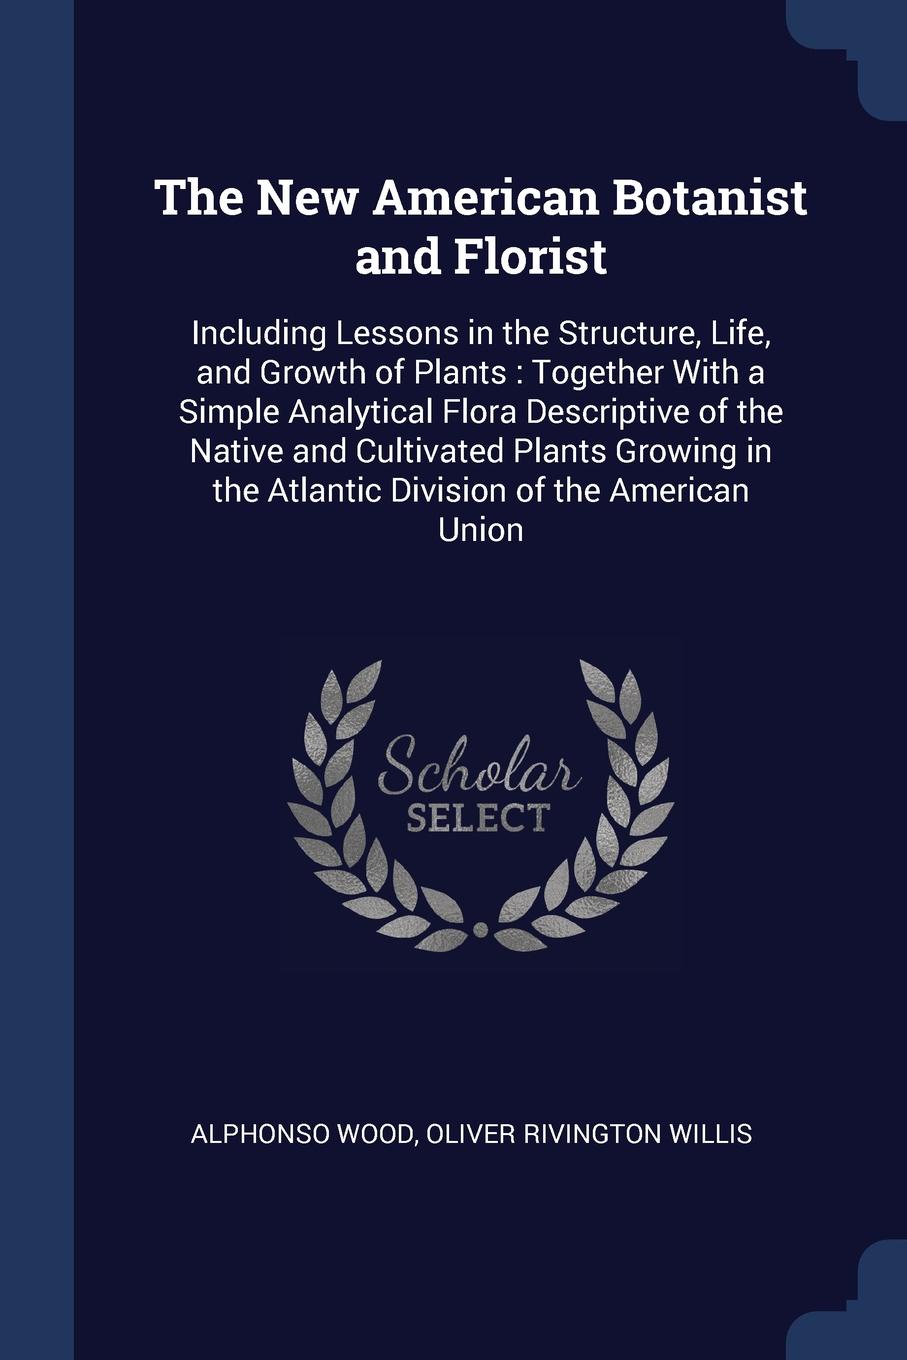 The New American Botanist and Florist. Including Lessons in the Structure, Life, and Growth of Plants : Together With a Simple Analytical Flora Descriptive of the Native and Cultivated Plants Growing in the Atlantic Division of the American Union